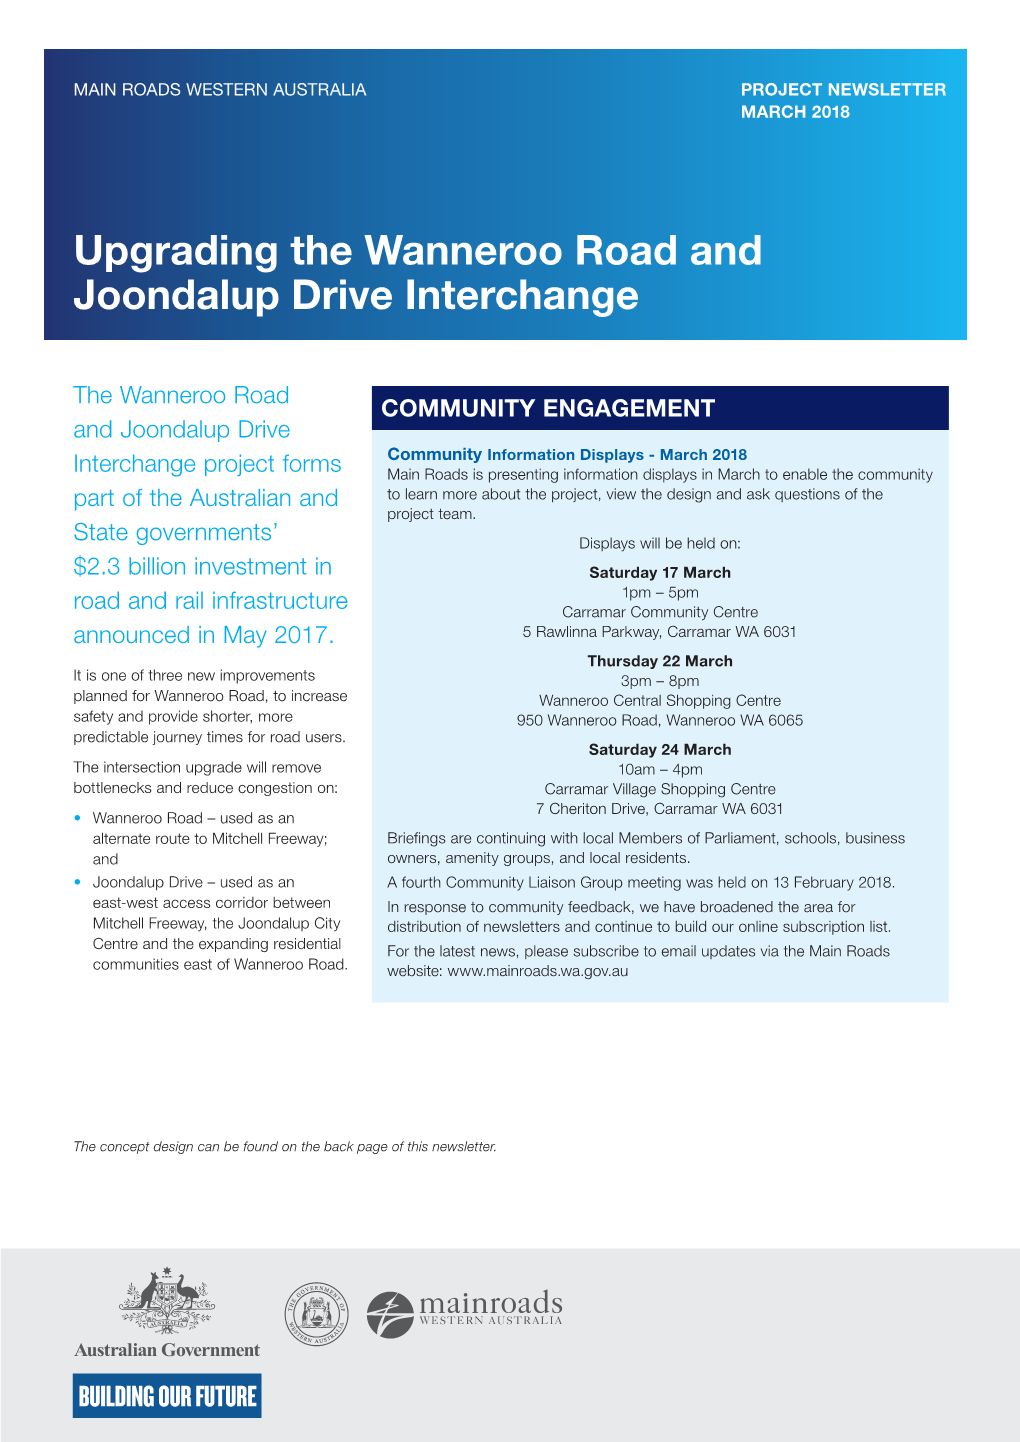 Upgrading the Wanneroo Road and Joondalup Drive Interchange